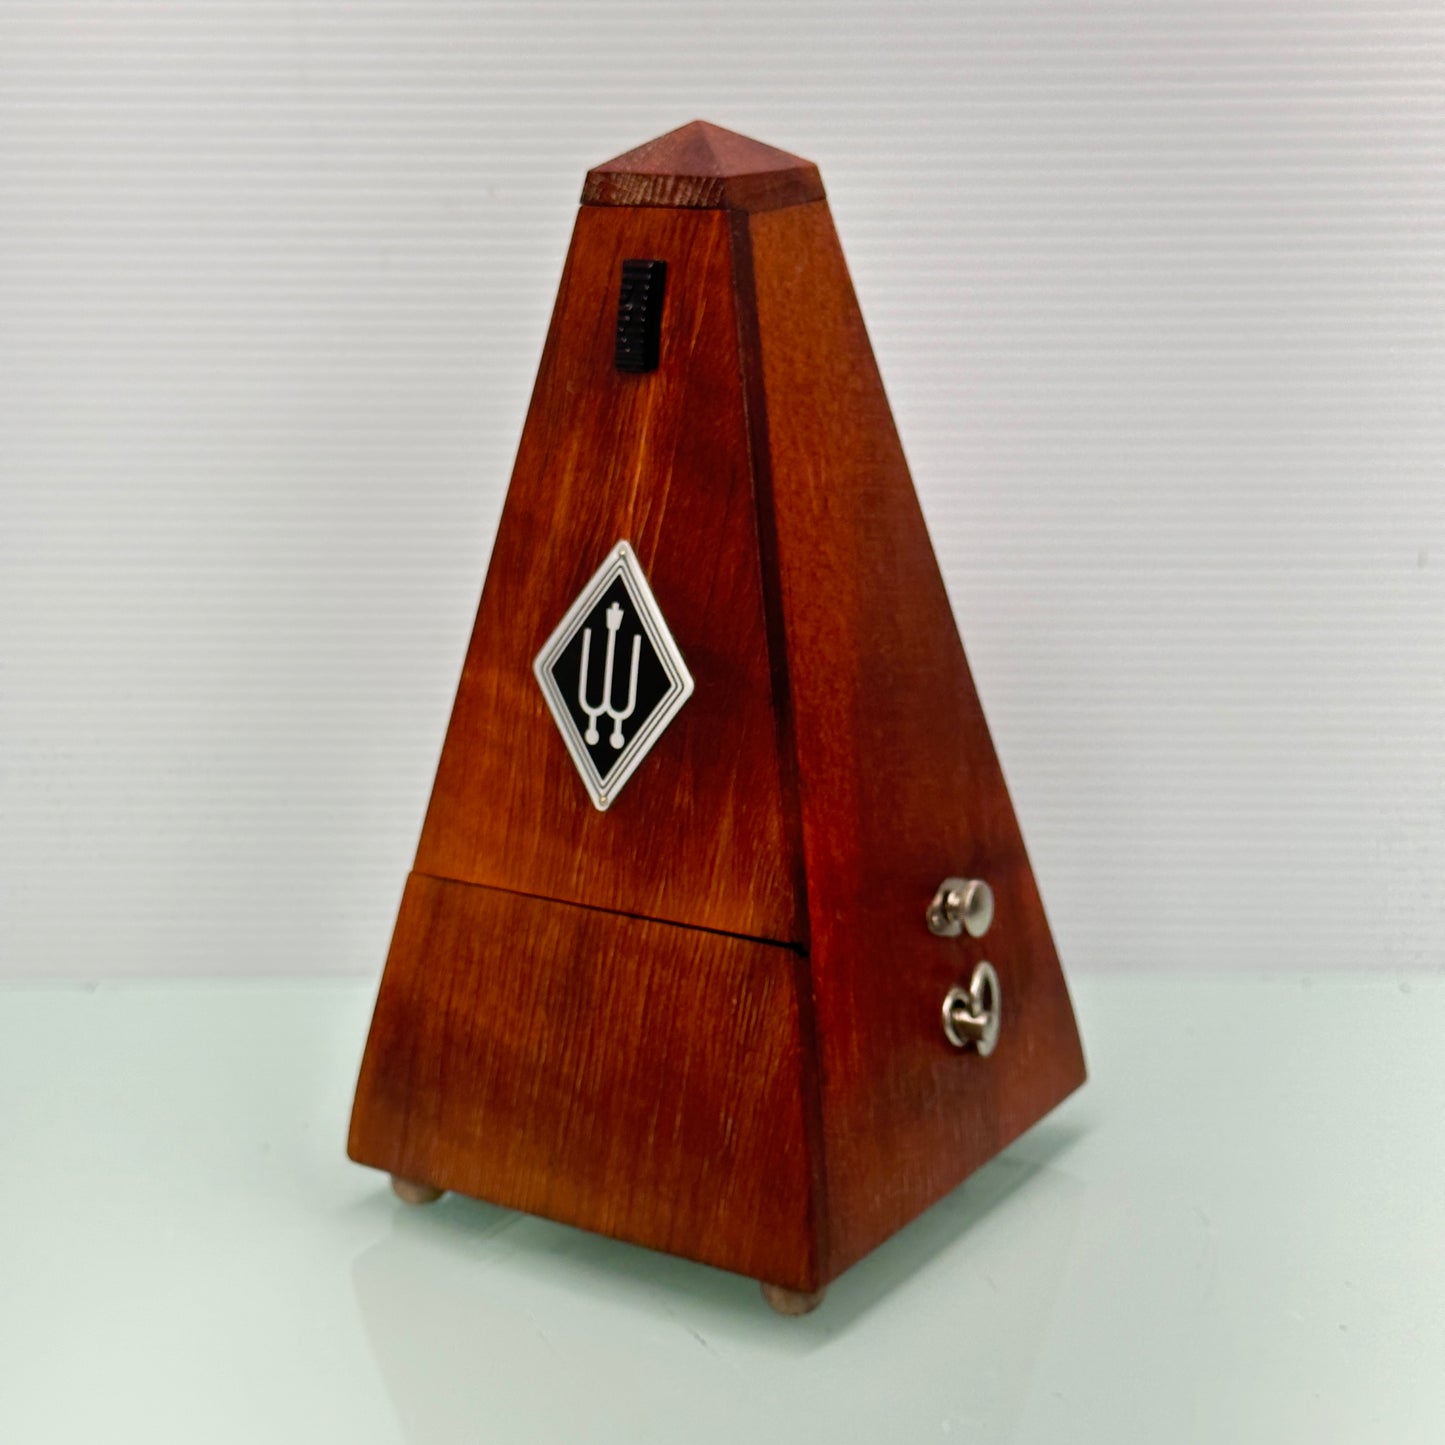 Wittner Vintage Wooden Metronome With Bell